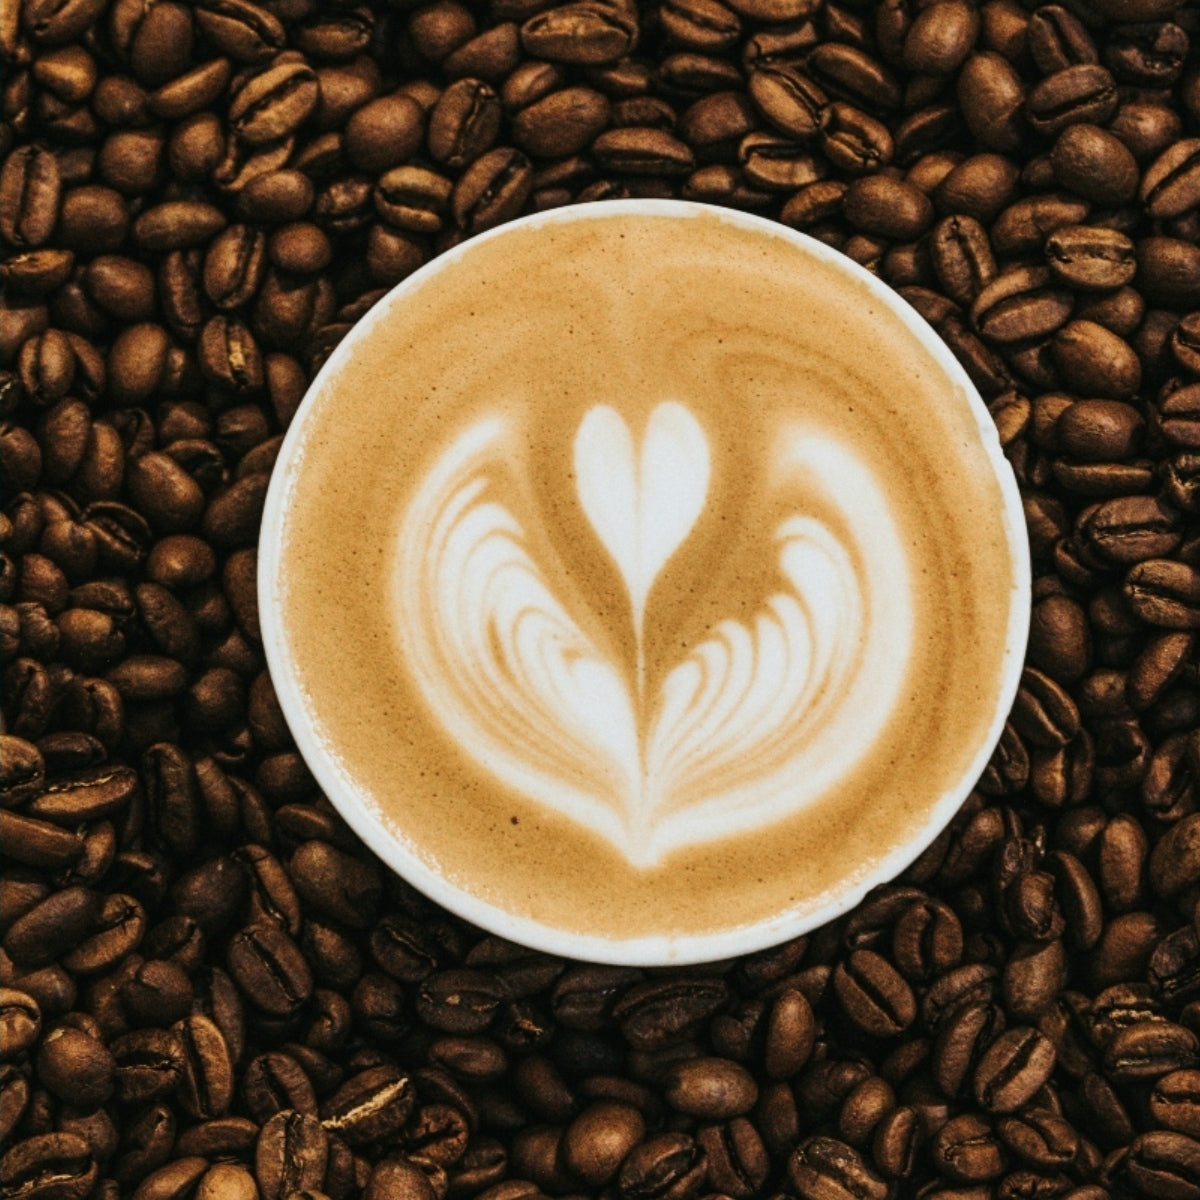 A latte that might contain honey, surrounded by coffee beans.